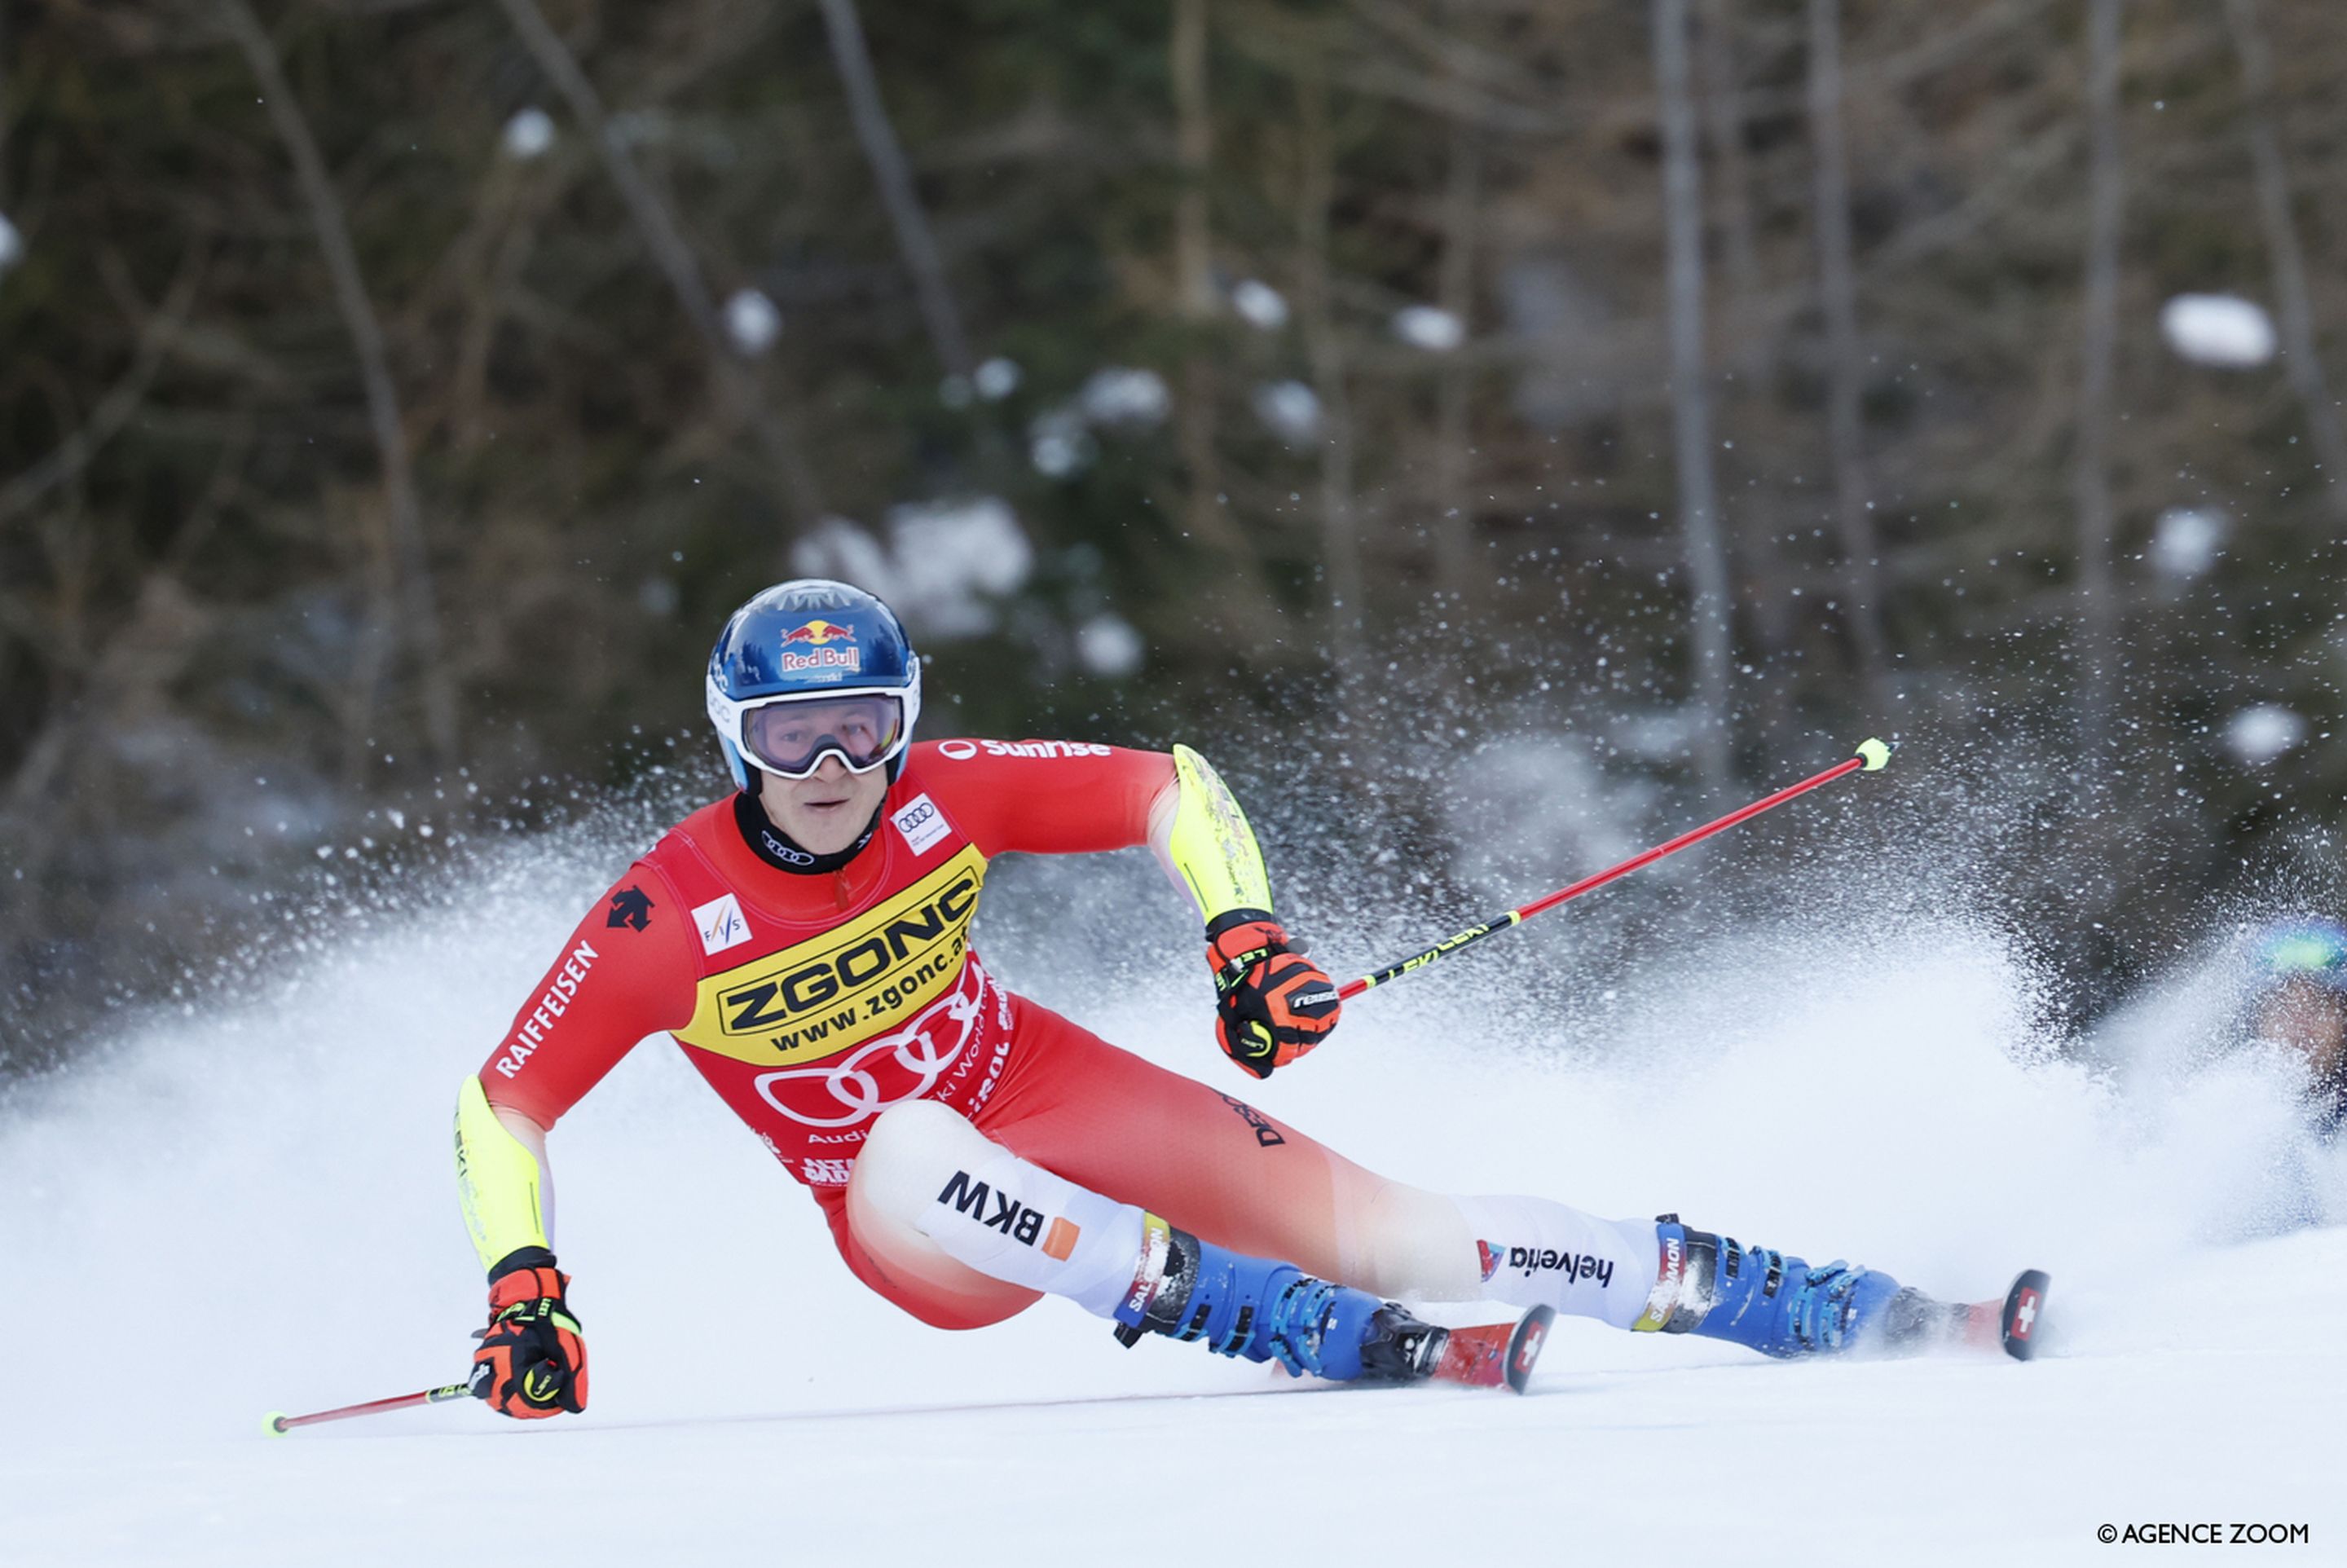 Marco Odermatt (SUI) in perfect giant slalom form during Monday's race (Agence Zoom)